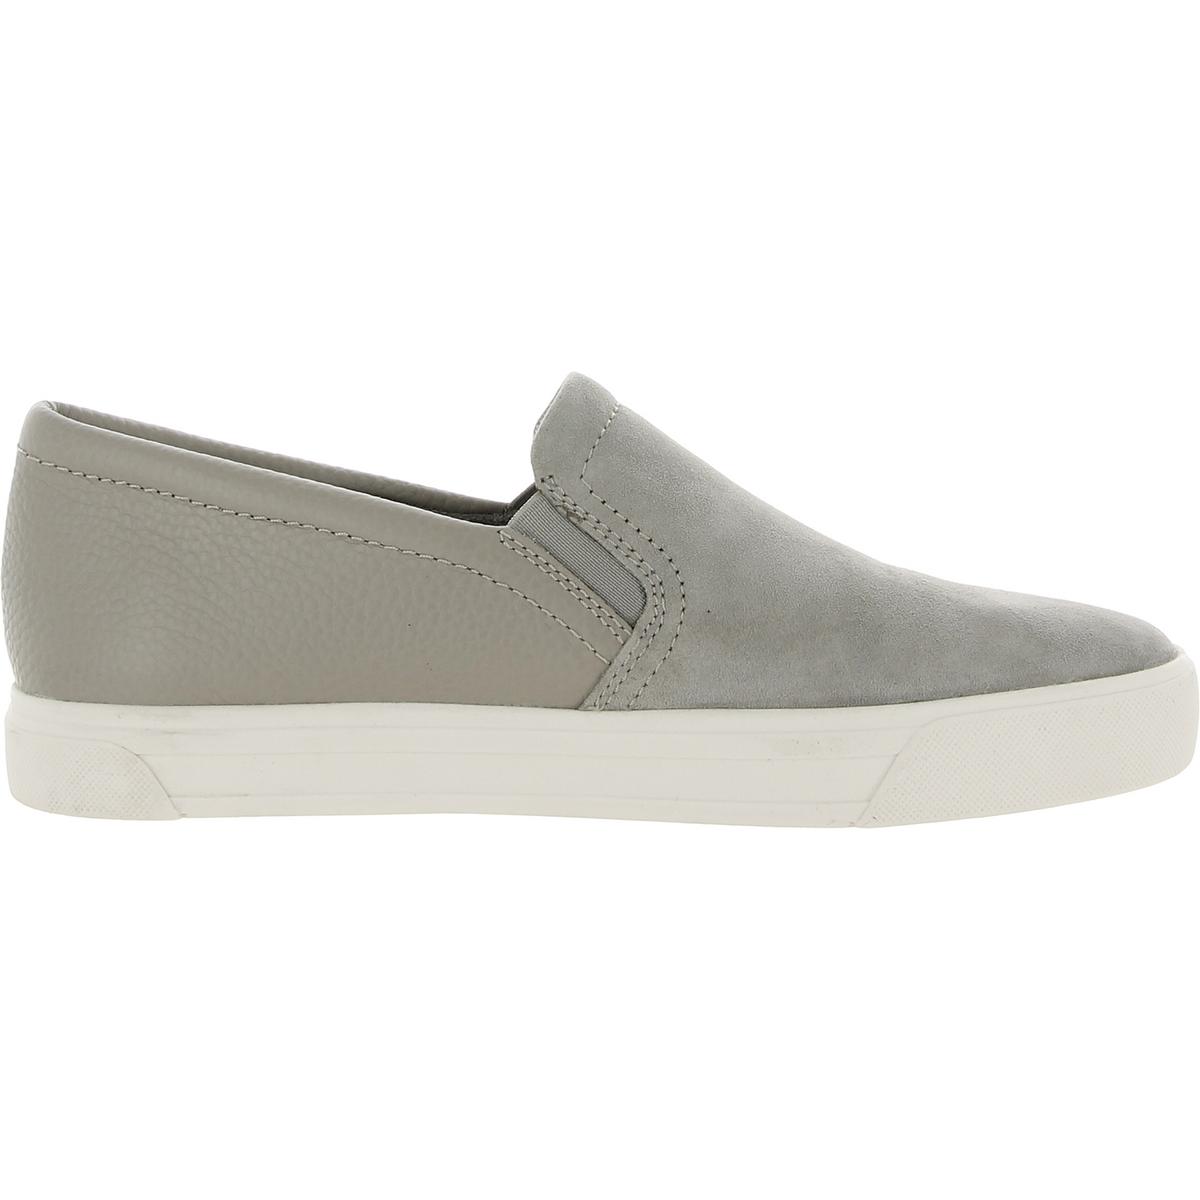 Naturalizer Womens Aileen Trainers Slip-On Sneakers Shoes BHFO 9341 | eBay